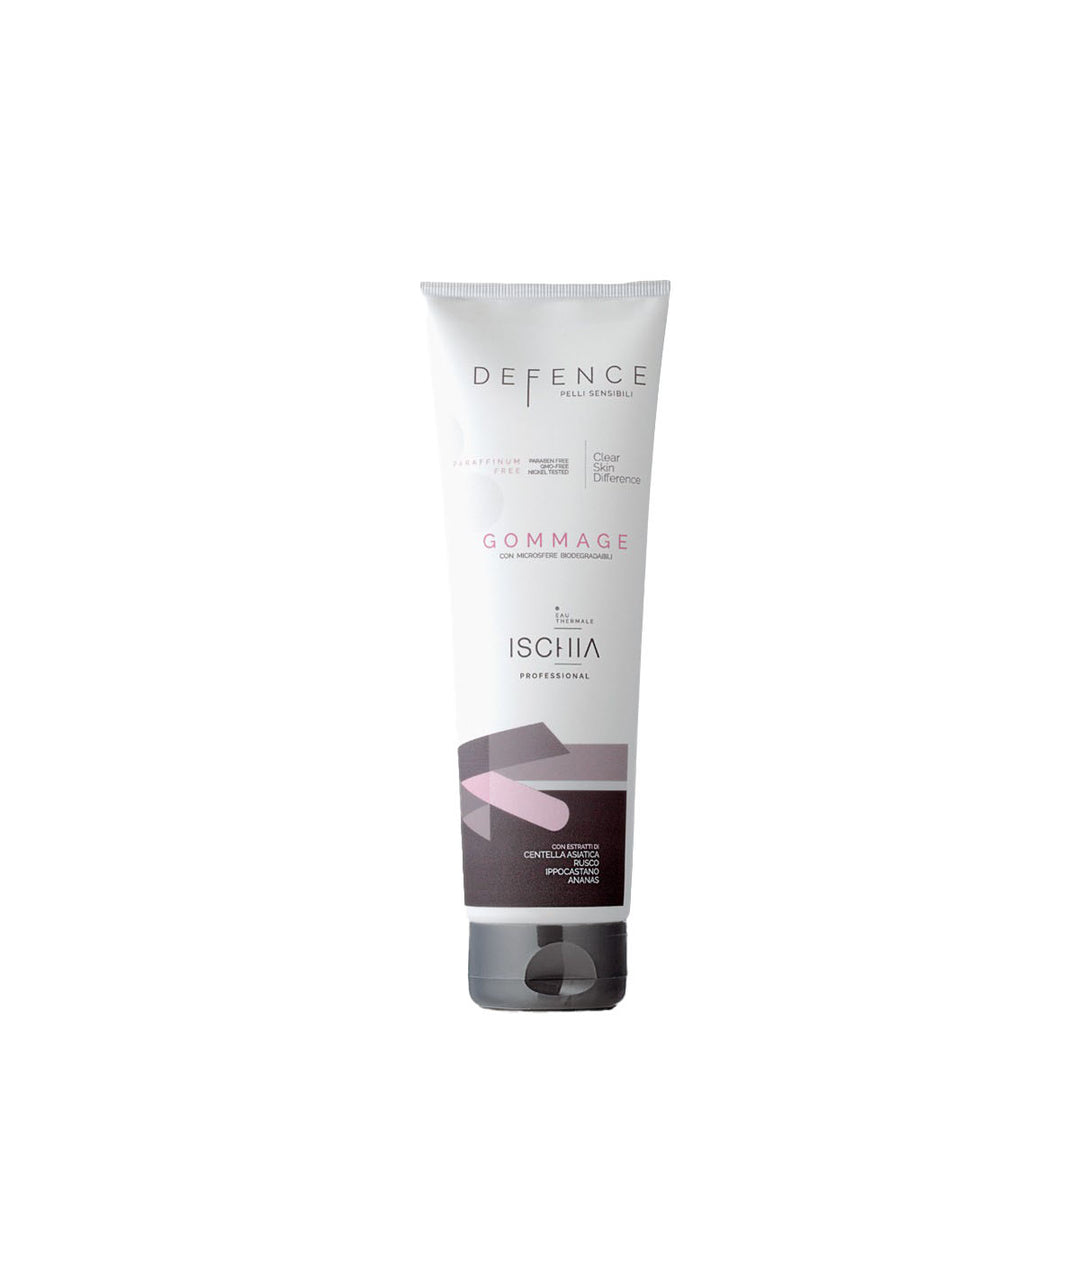 

Ischia Thermal Water Defence Facial Scrub with Biodegradable Microspheres for Sensitive Skin 250 ml.